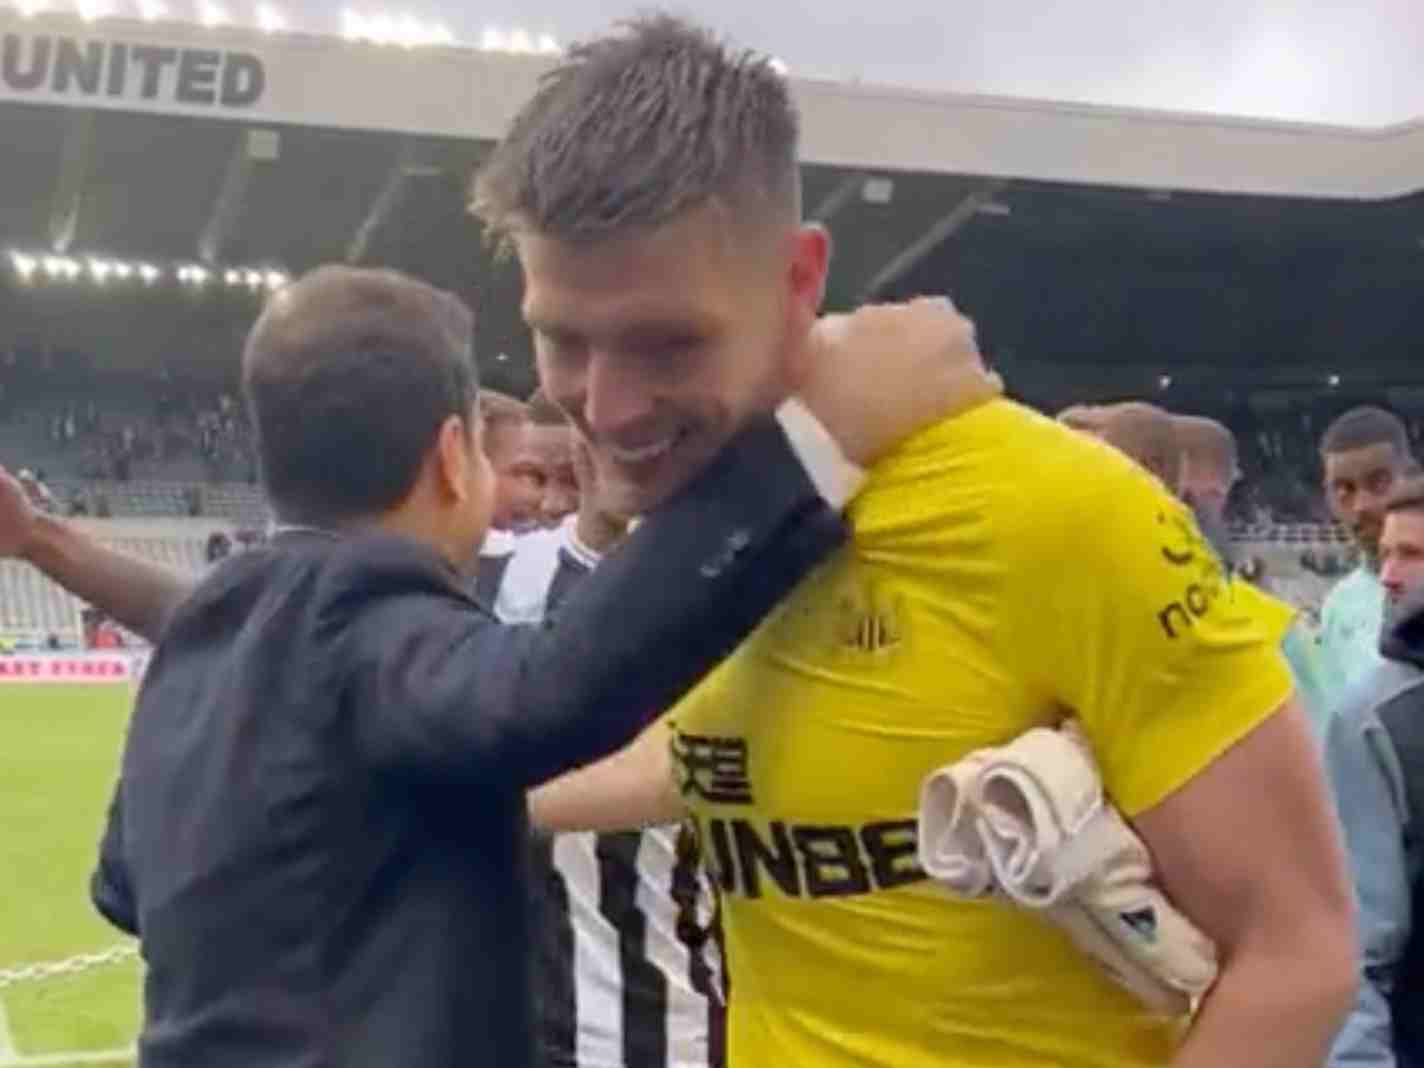 Newcastle Owner Mehrdad Ghodoussi Sets Tone of Unity with Post-Match Moment